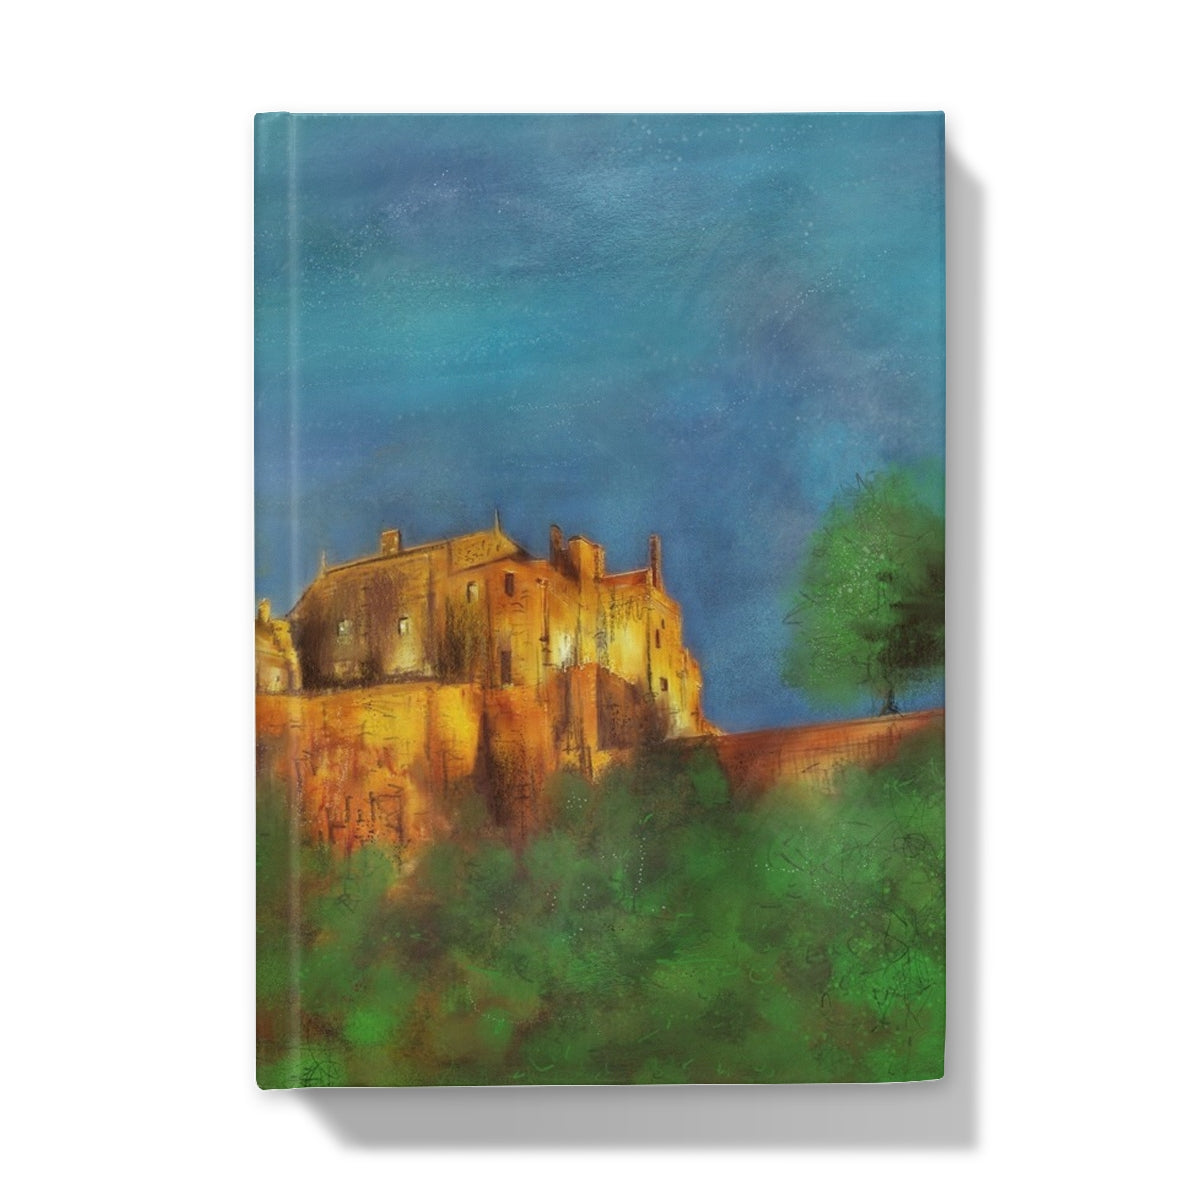 Stirling Castle Art Gifts Hardback Journal-Journals & Notebooks-Historic & Iconic Scotland Art Gallery-A4-Plain-Paintings, Prints, Homeware, Art Gifts From Scotland By Scottish Artist Kevin Hunter